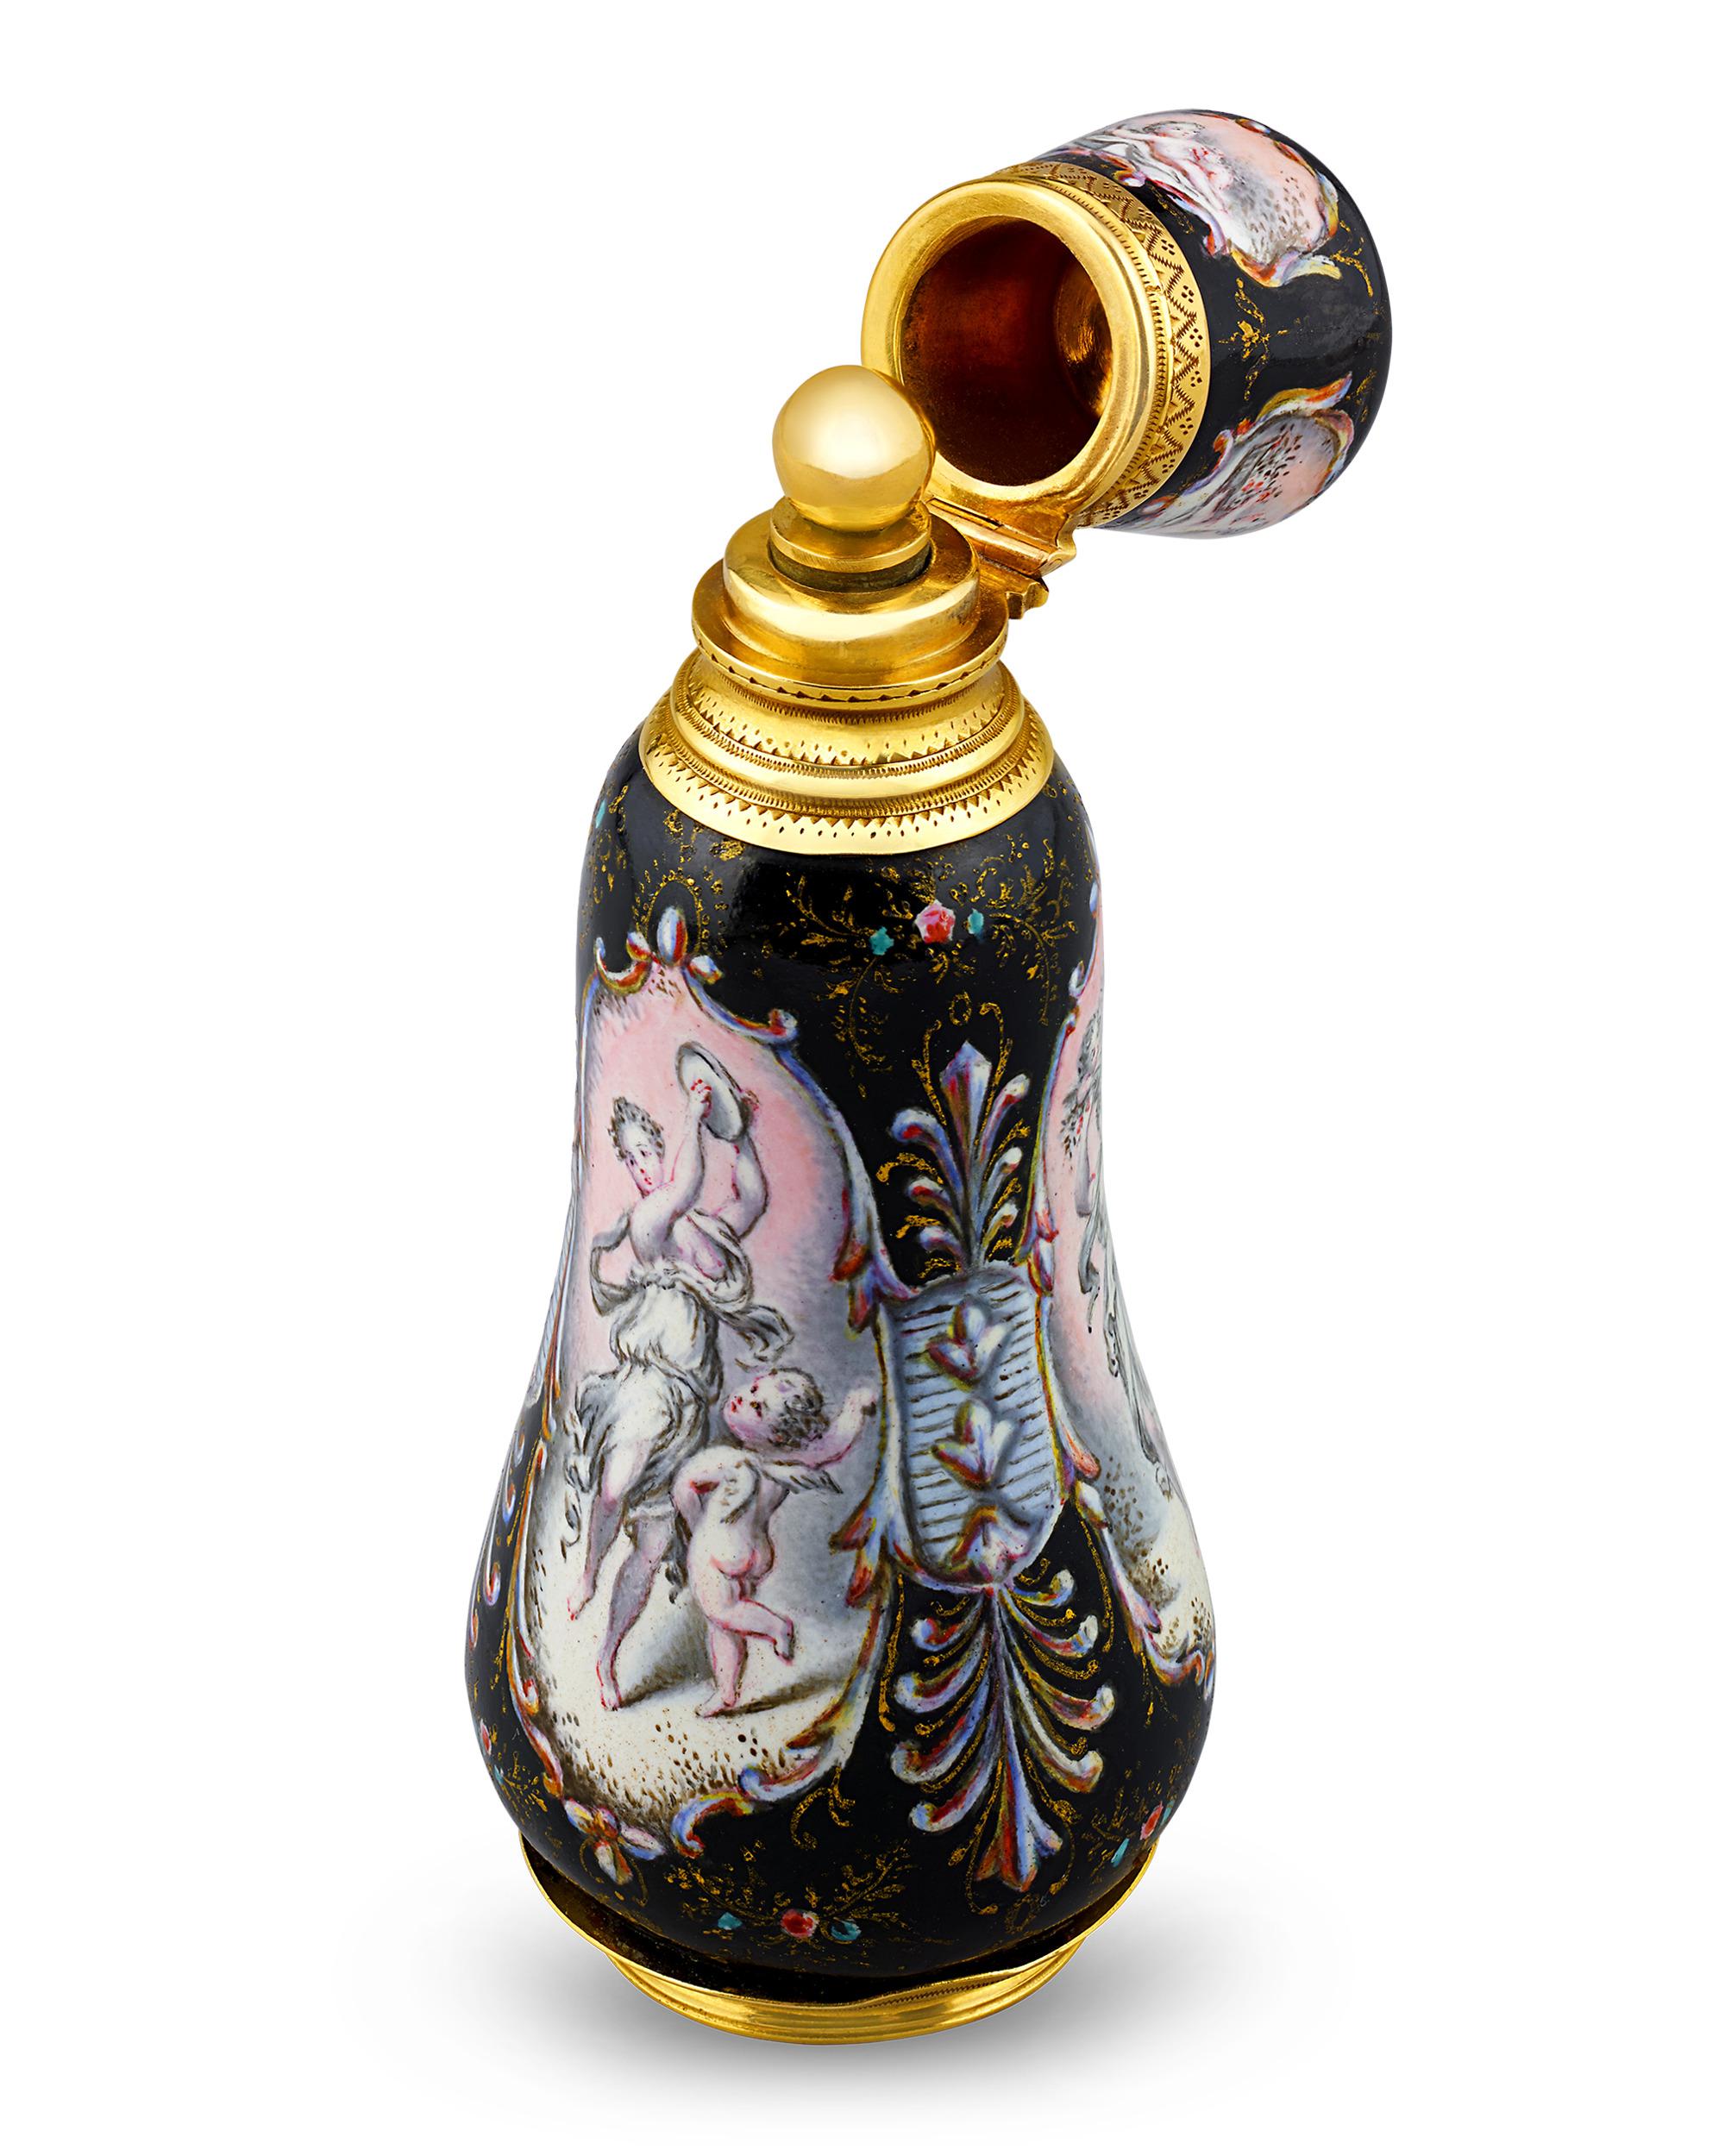 Exceptional enameling and gold detailing distinguish this diminutive French scent flask. Figurative panels emerge from a rich ground of black enamel and gilt decoration to reveal a scene of a young woman dancing and playing a tambourine for a